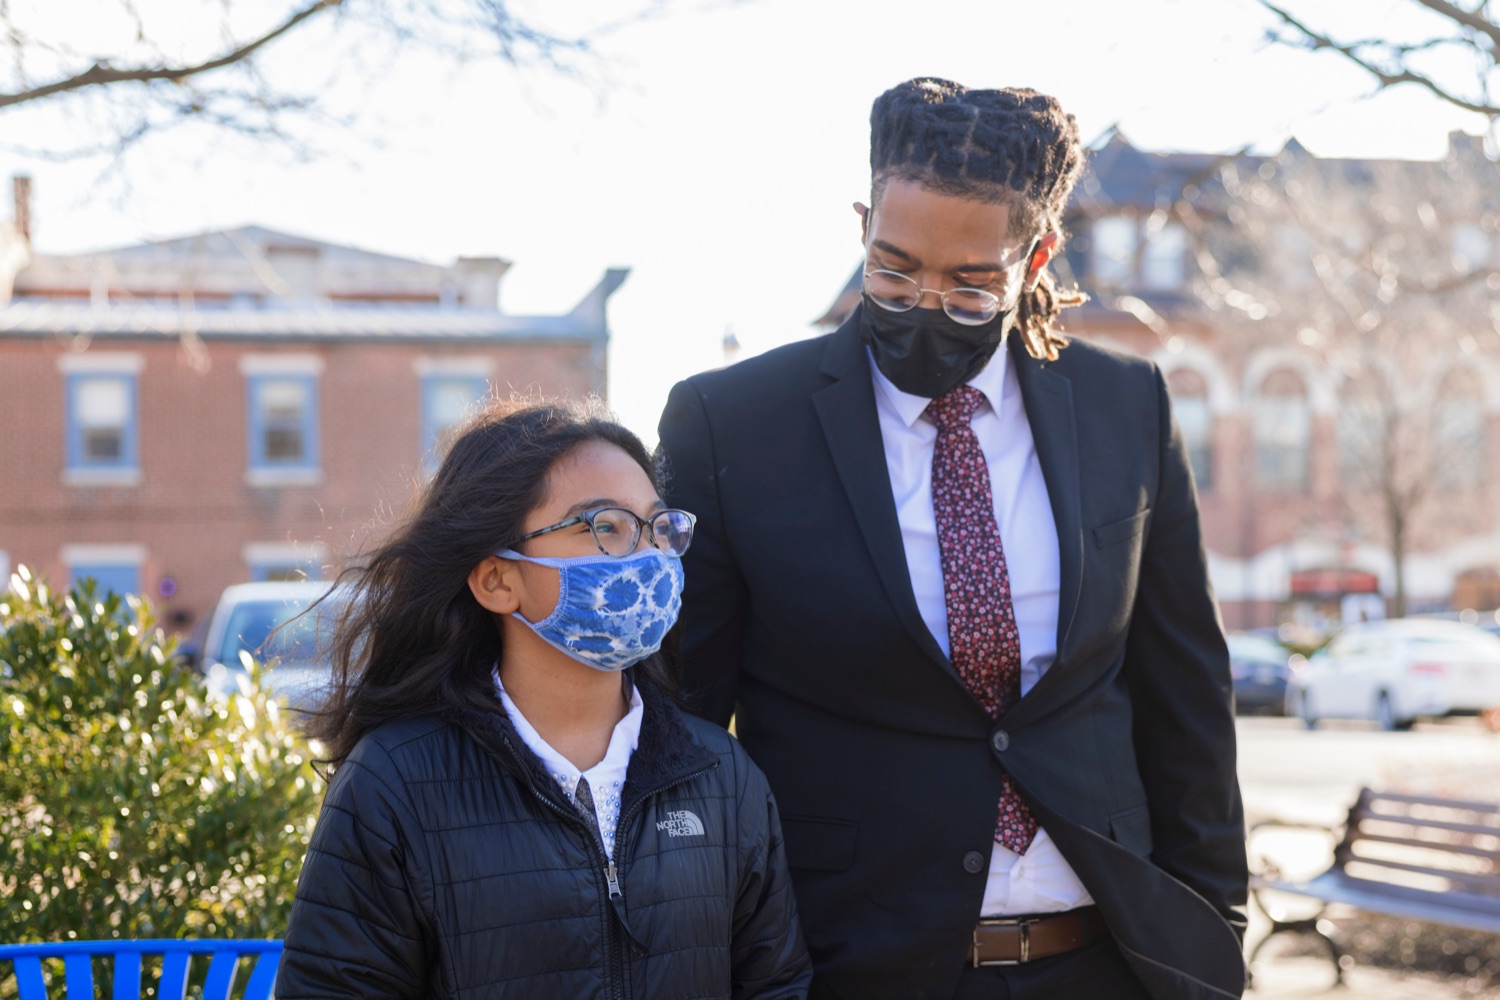 Victor Cabral, Office of Advocacy and Reform deputy director, with his 9-year-old daughter, Bella, during an event observing the "Day of Racial Healing" in Pennsylvania at Jenkintown Town Square on Tuesday, January 18, 2022. By proclamation of Governor Tom Wolf, Pennsylvania joined communities across the United States in mobilizing events and activities that support bringing racial healing into homes, communities, and institutions. This is a call to action to work together and heal the wounds of racial bias and commit to building an equitable and just society so that all residents can thrive.<br><a href="https://filesource.amperwave.net/commonwealthofpa/photo/20315_OAR_RacialHealing_NK_004.JPG" target="_blank">⇣ Download Photo</a>